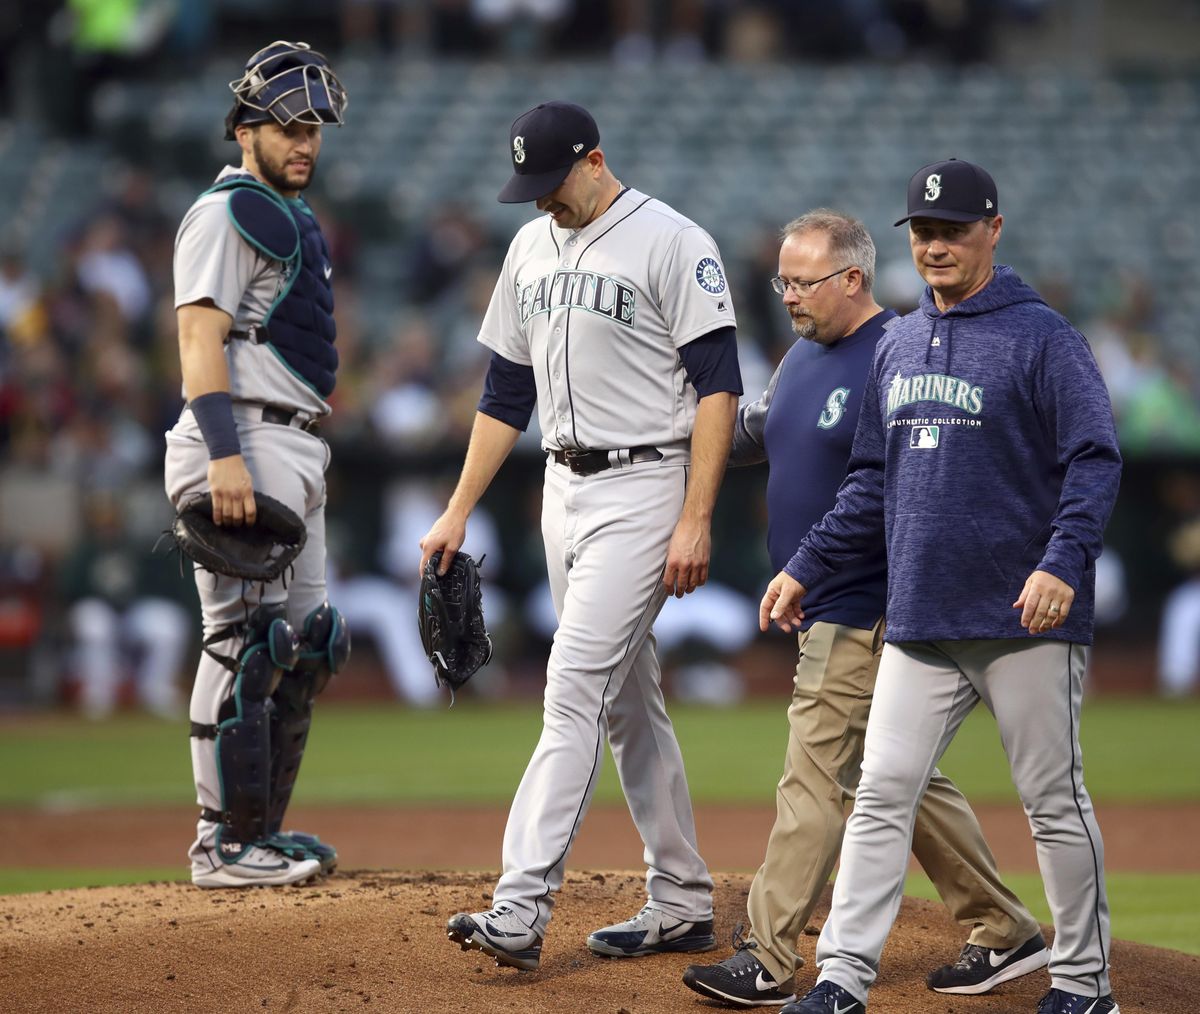 Seattle Mariners pitcher James Paxton, second from left, is escorted off the field after being hit by a ball in the first inning of a baseball game against the Oakland Athletics Tuesday, Aug. 14, 2018, in Oakland, Calif. (Ben Margot / AP)